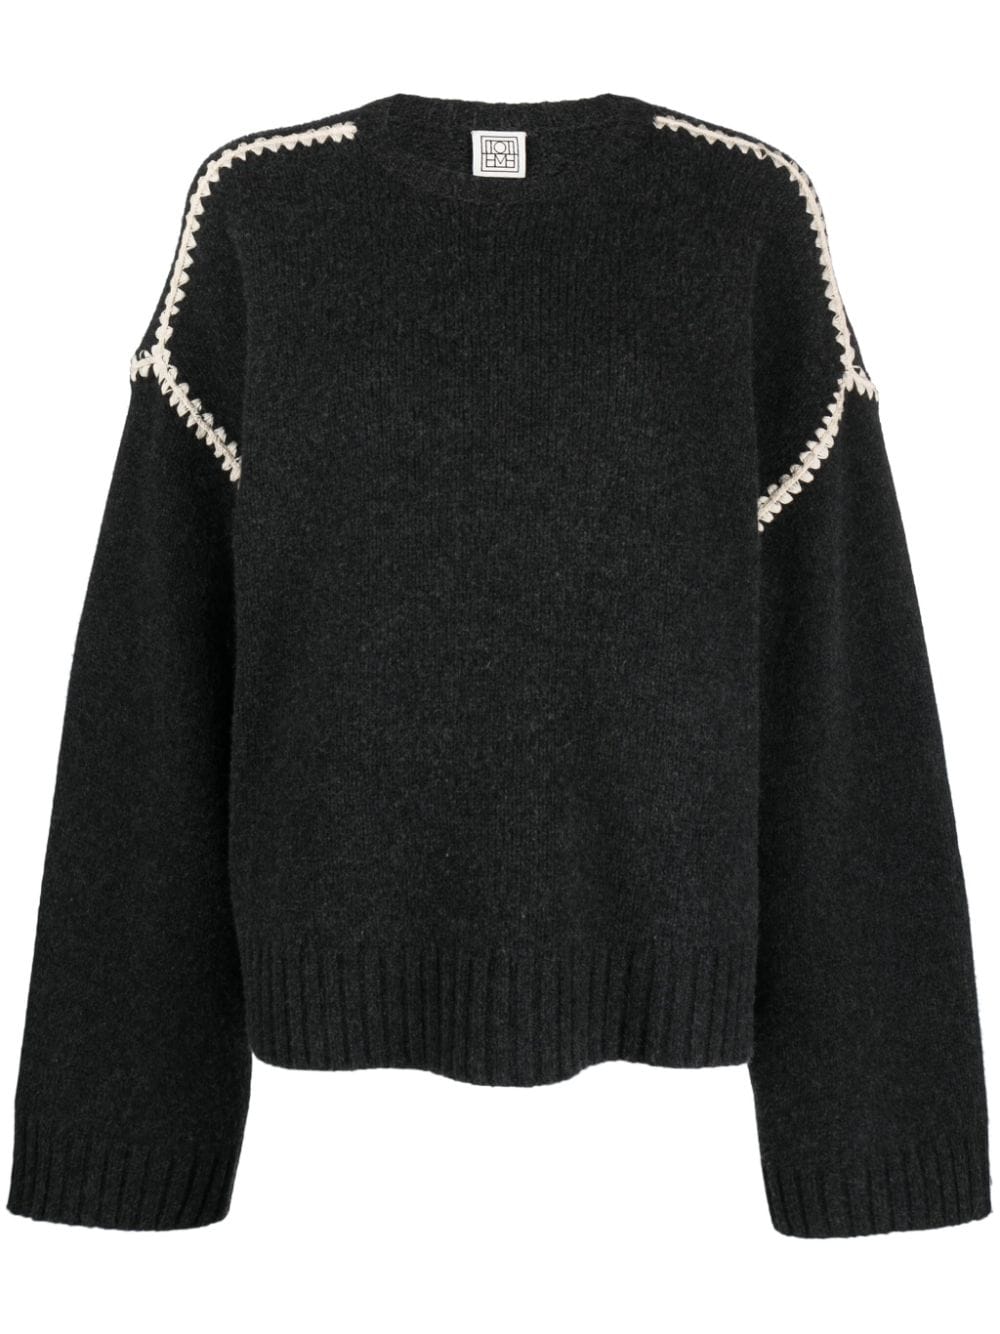 TOTEME Embroidered Wool Jumper - Farfetch